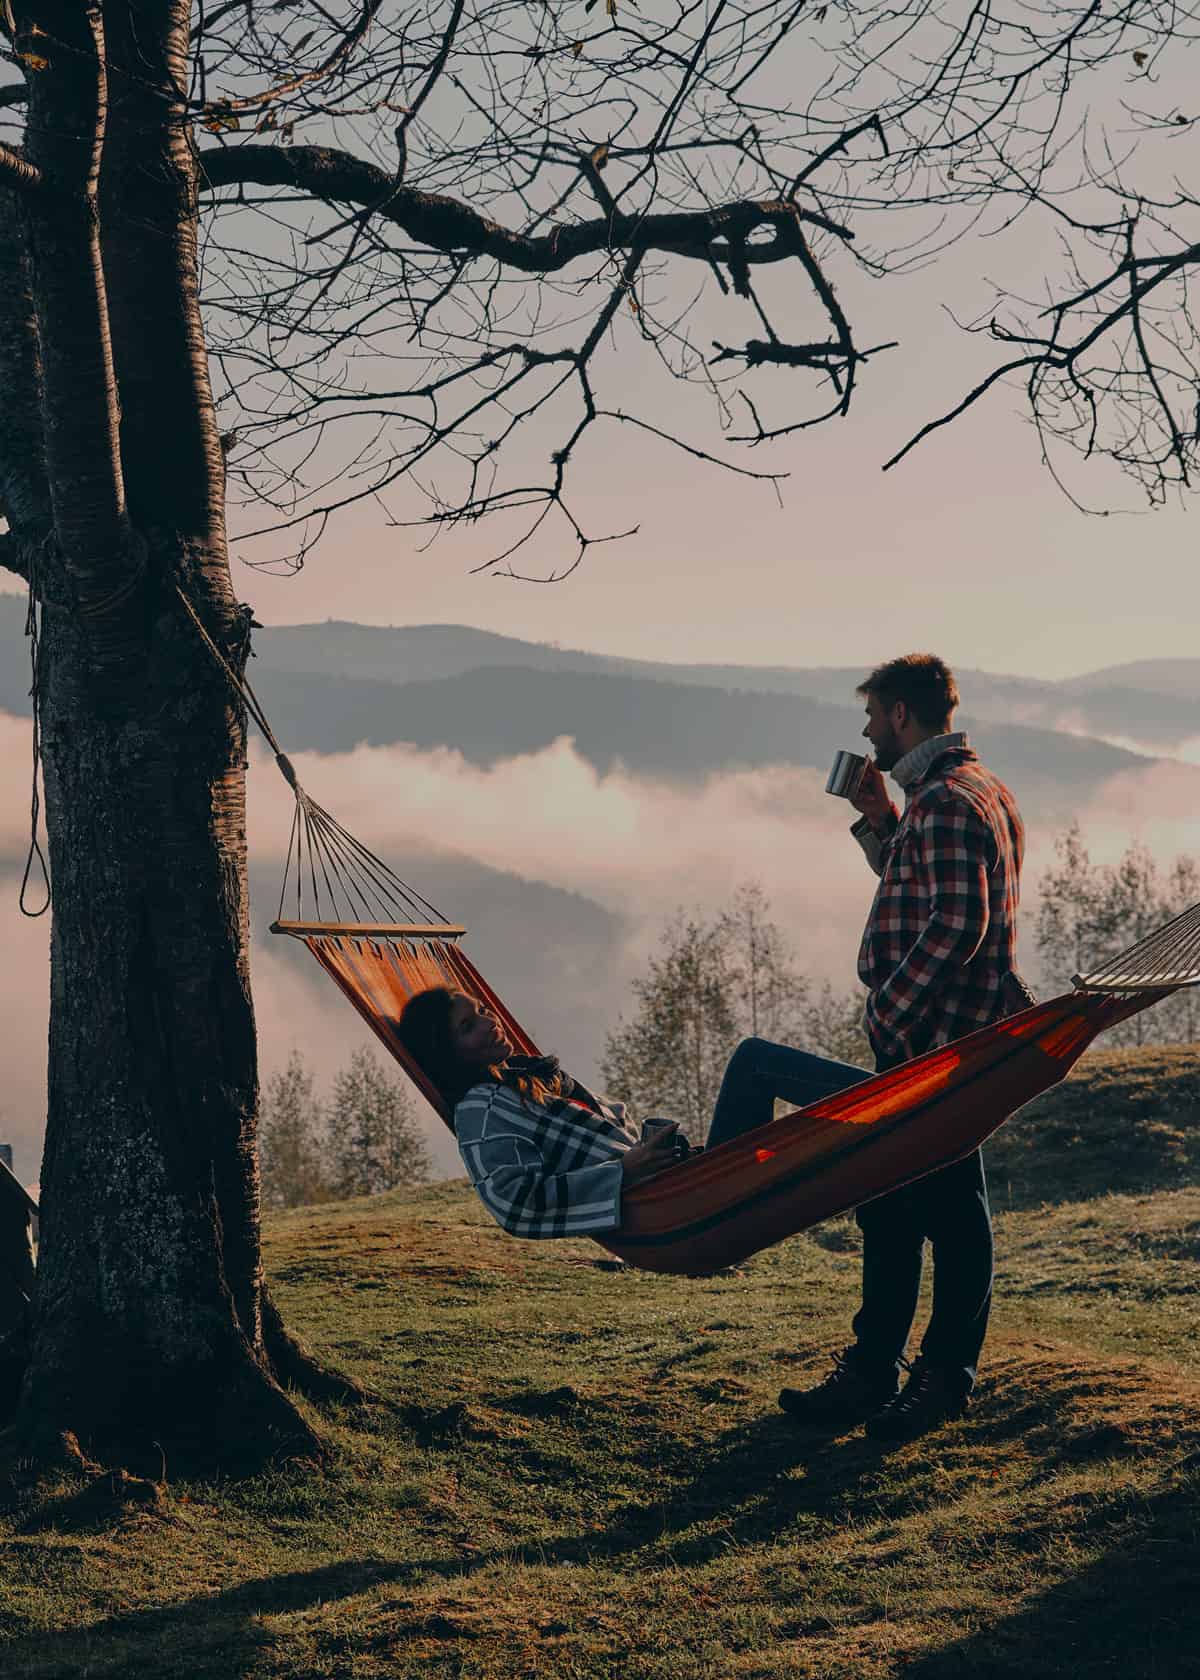 Couple camping with a hammock